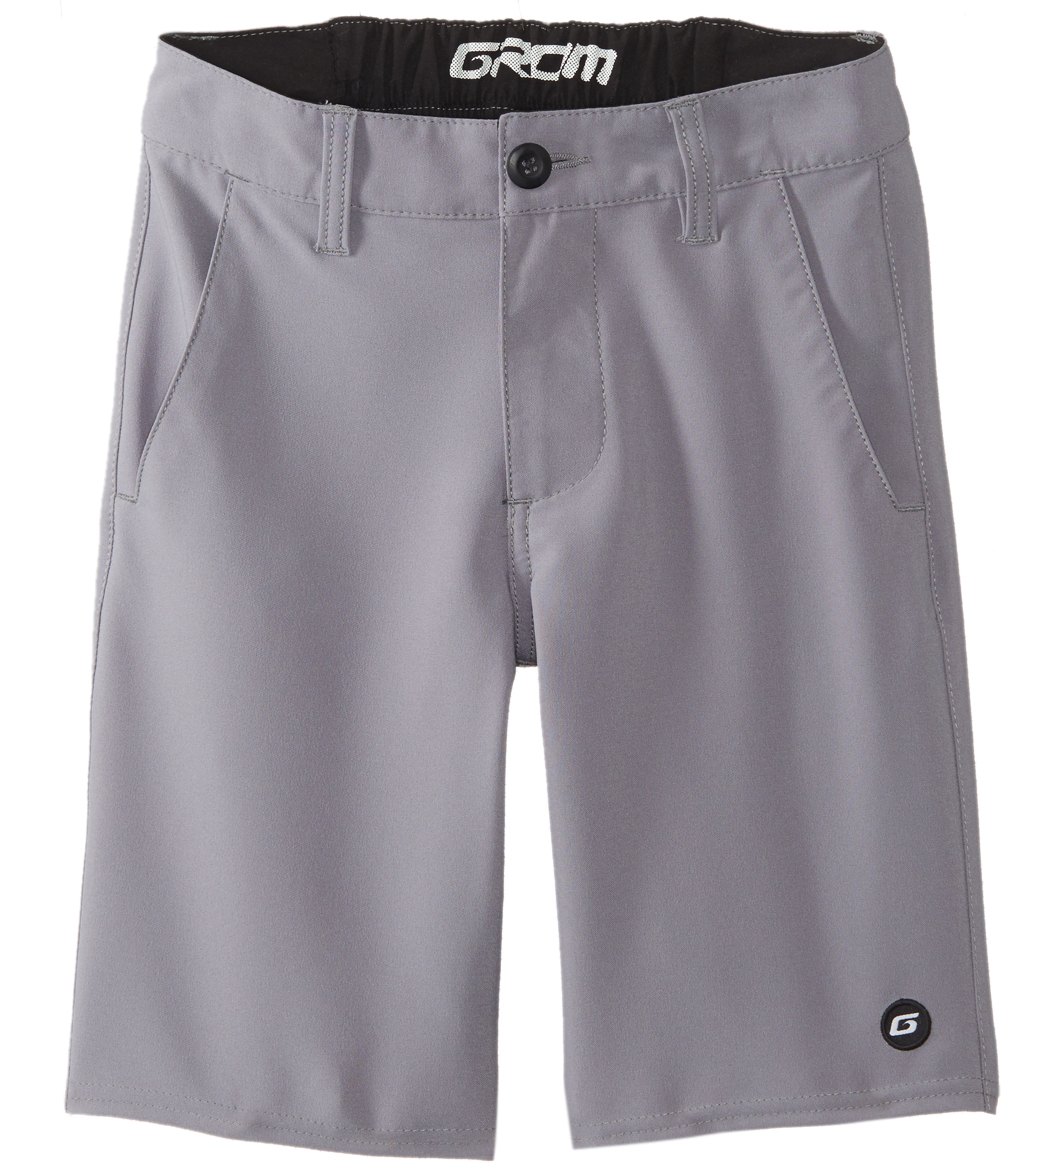 Grom Boys' Off Road Wet/Dry Short - Gray X-Small Polyester/Cotton - Swimoutlet.com